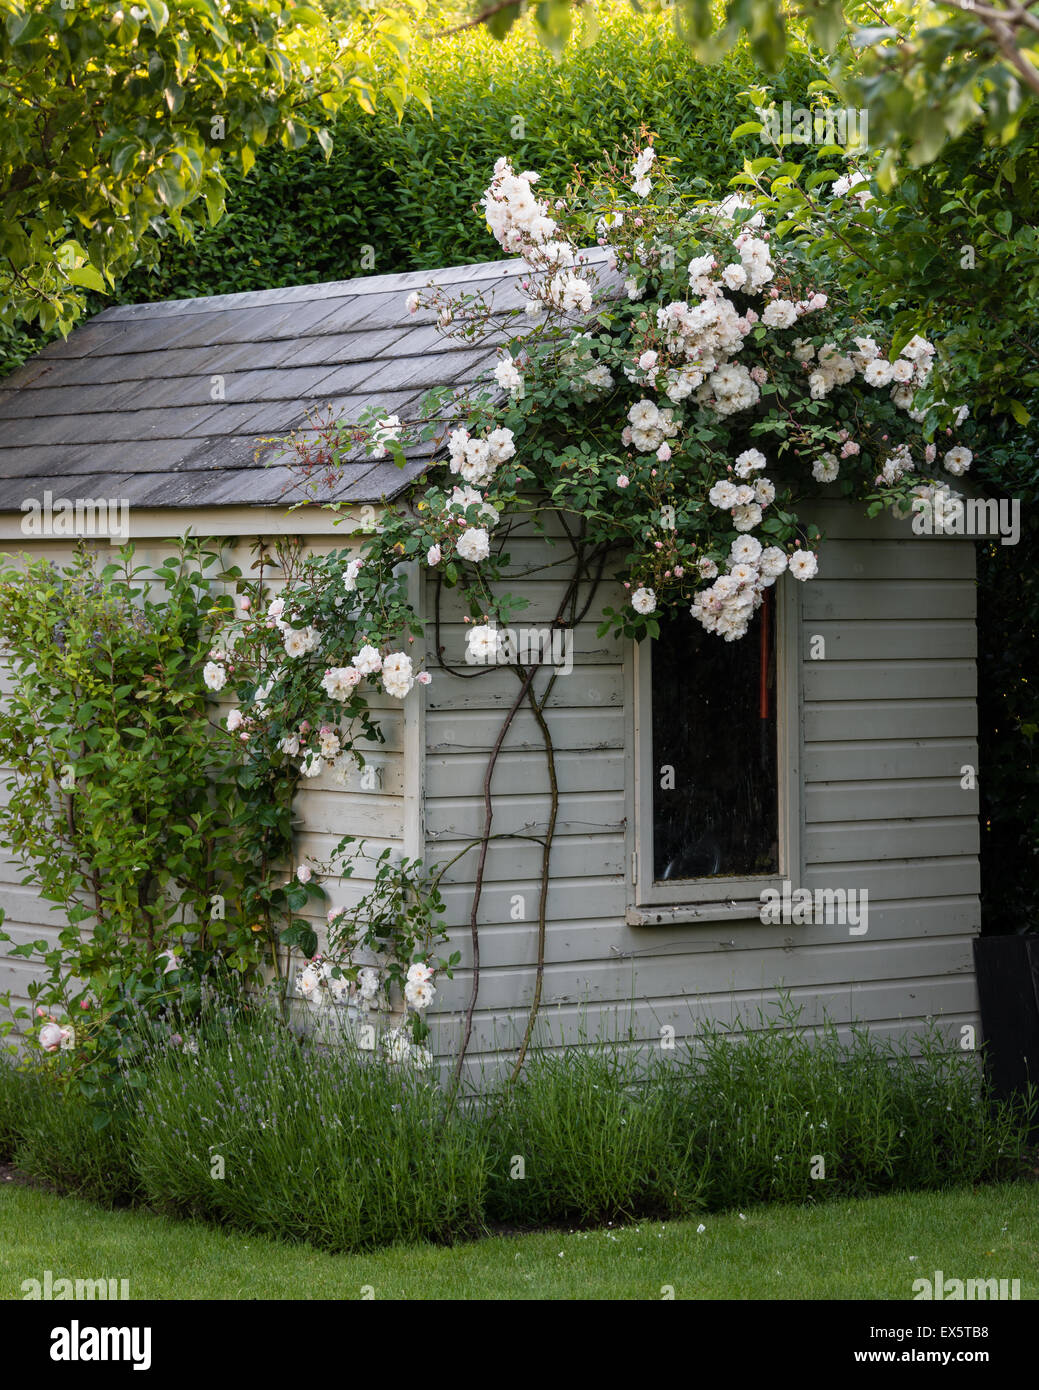 Wooden shed with climbing rose in country garden Stock Photo